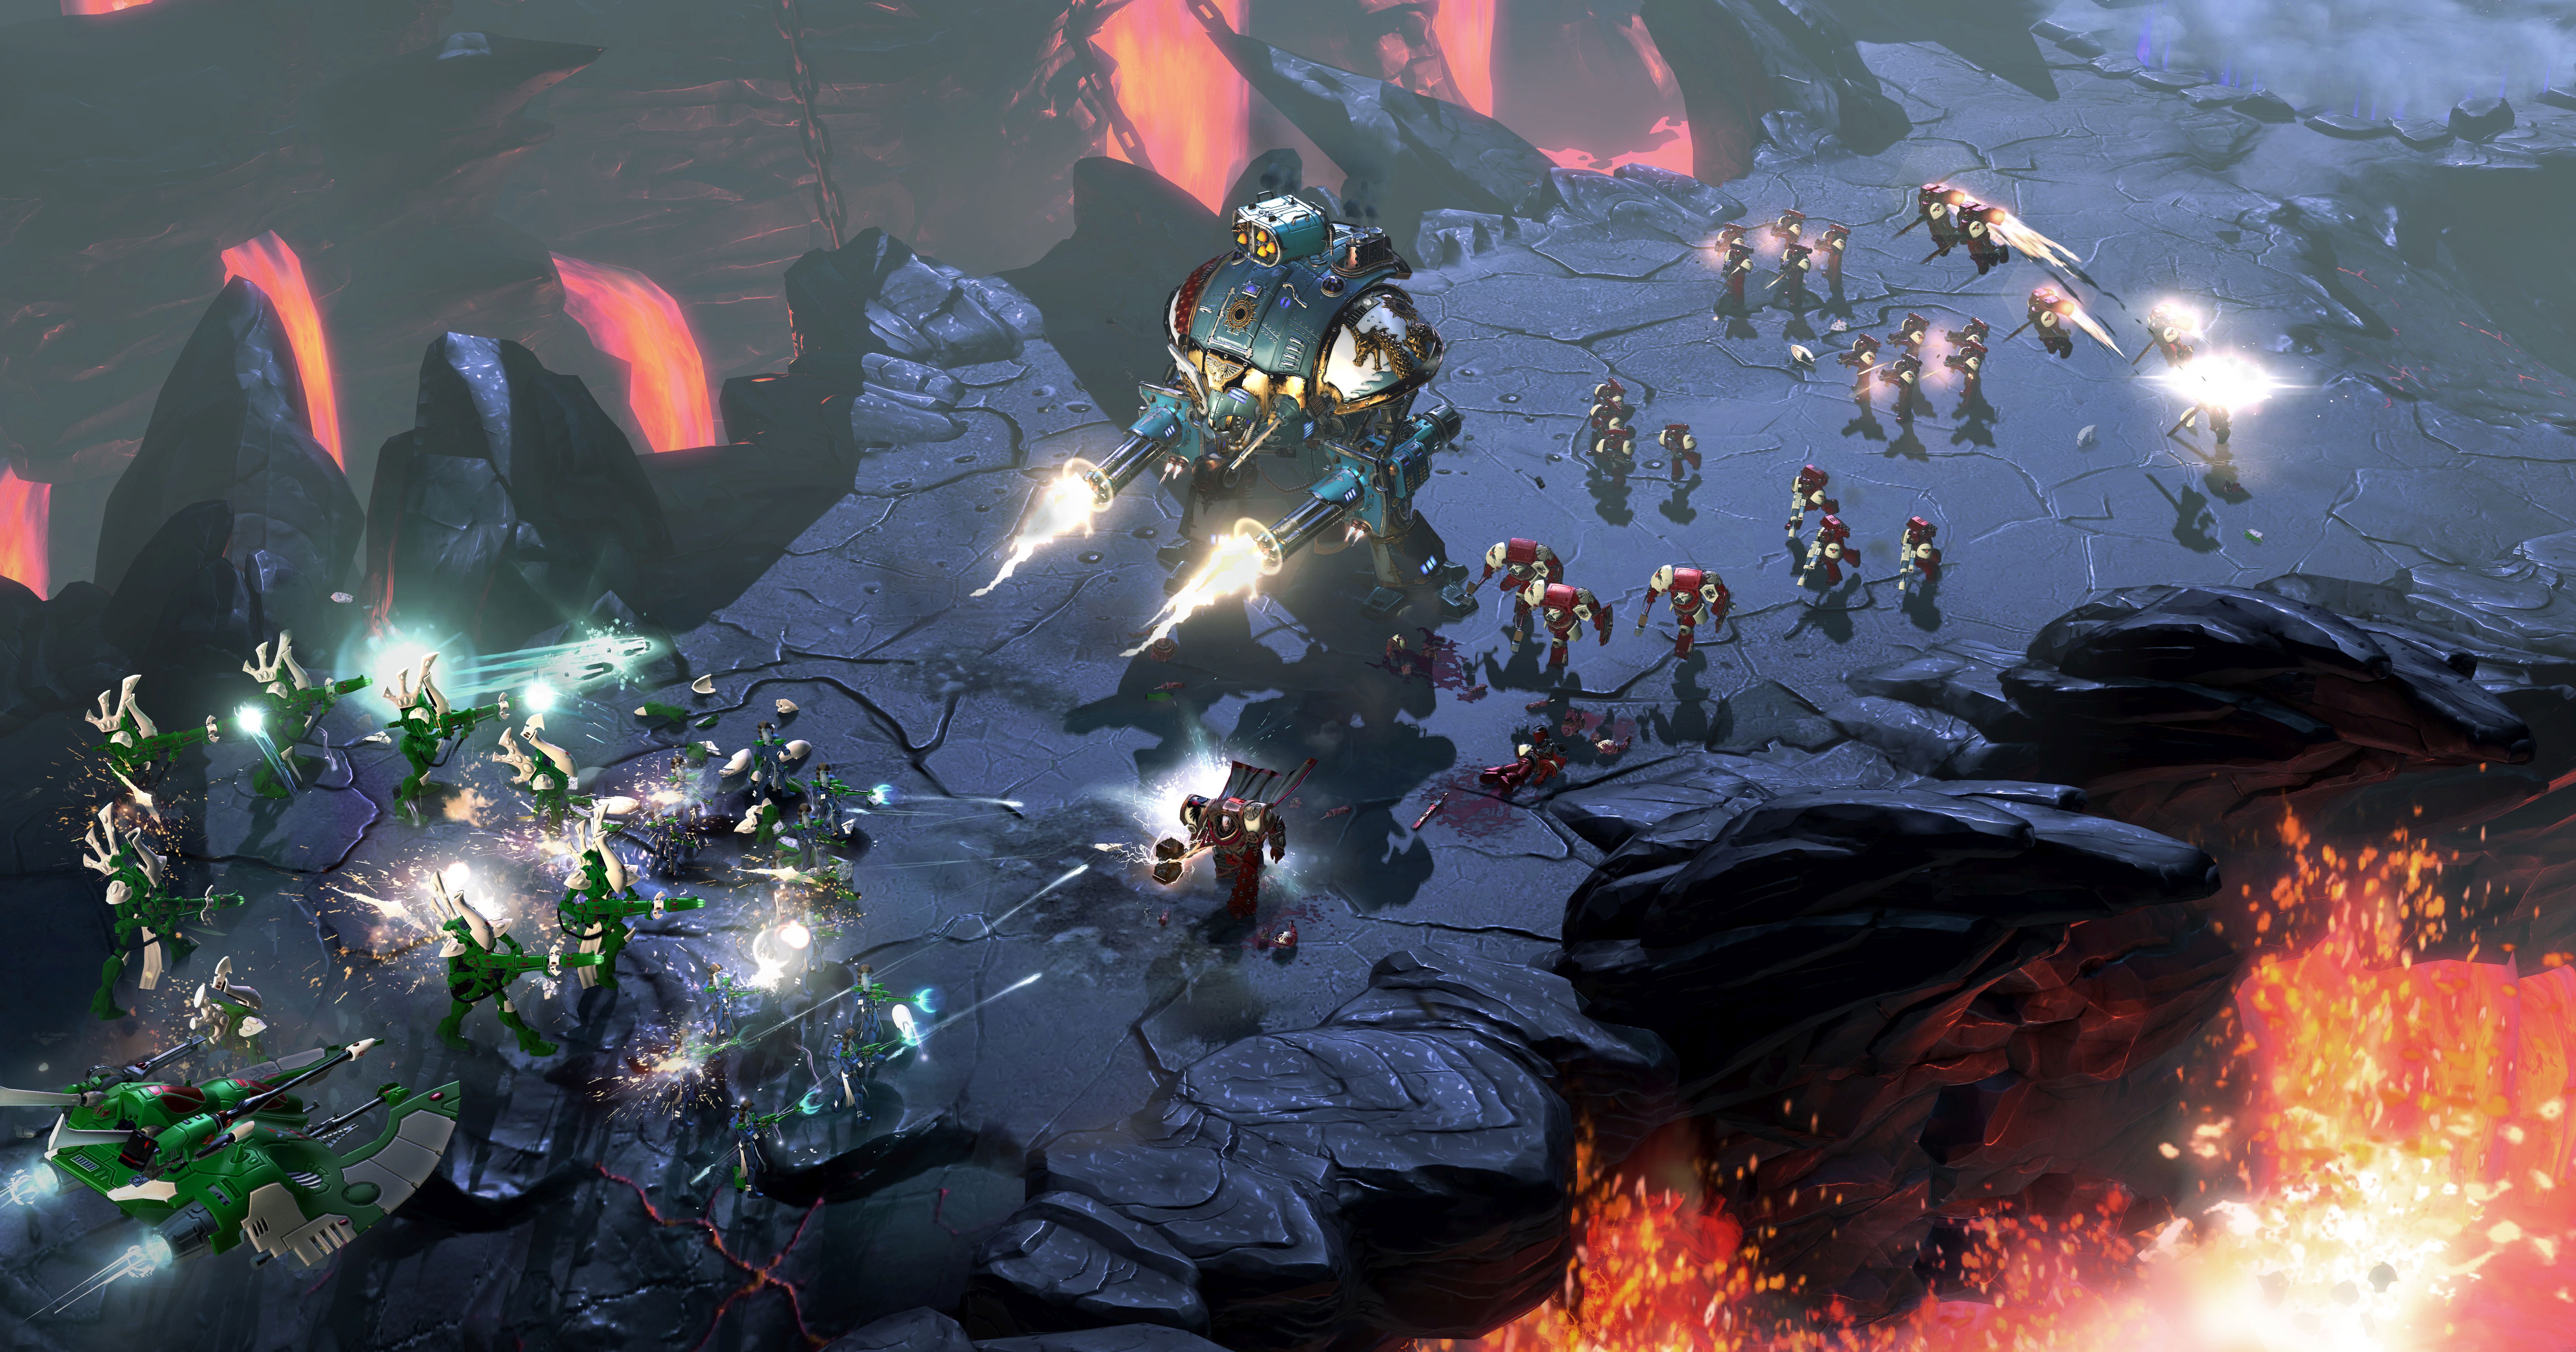 download 40k dawn of war 3 for free